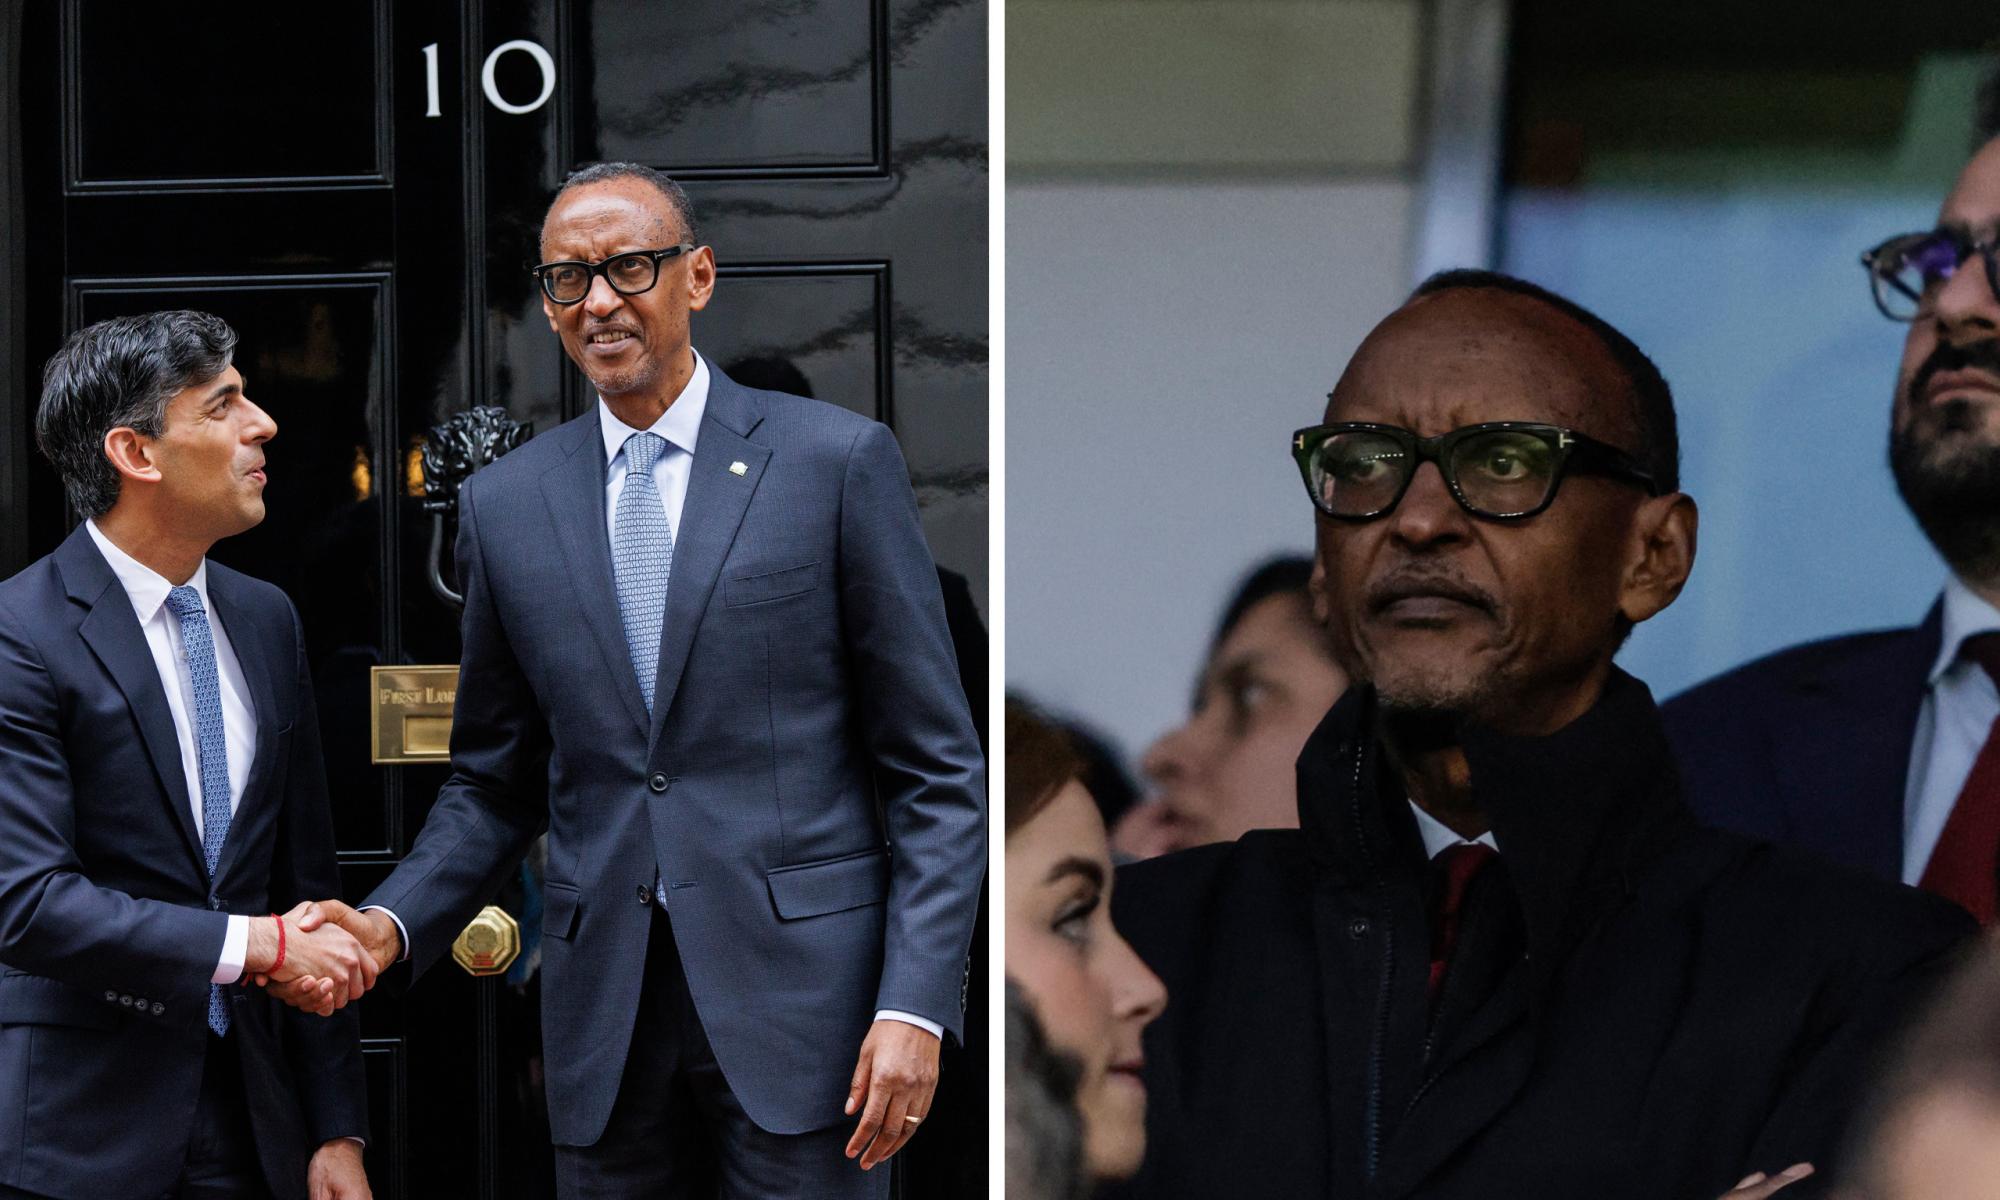 rwandan leader went to arsenal game while country marked 30 years since genocide